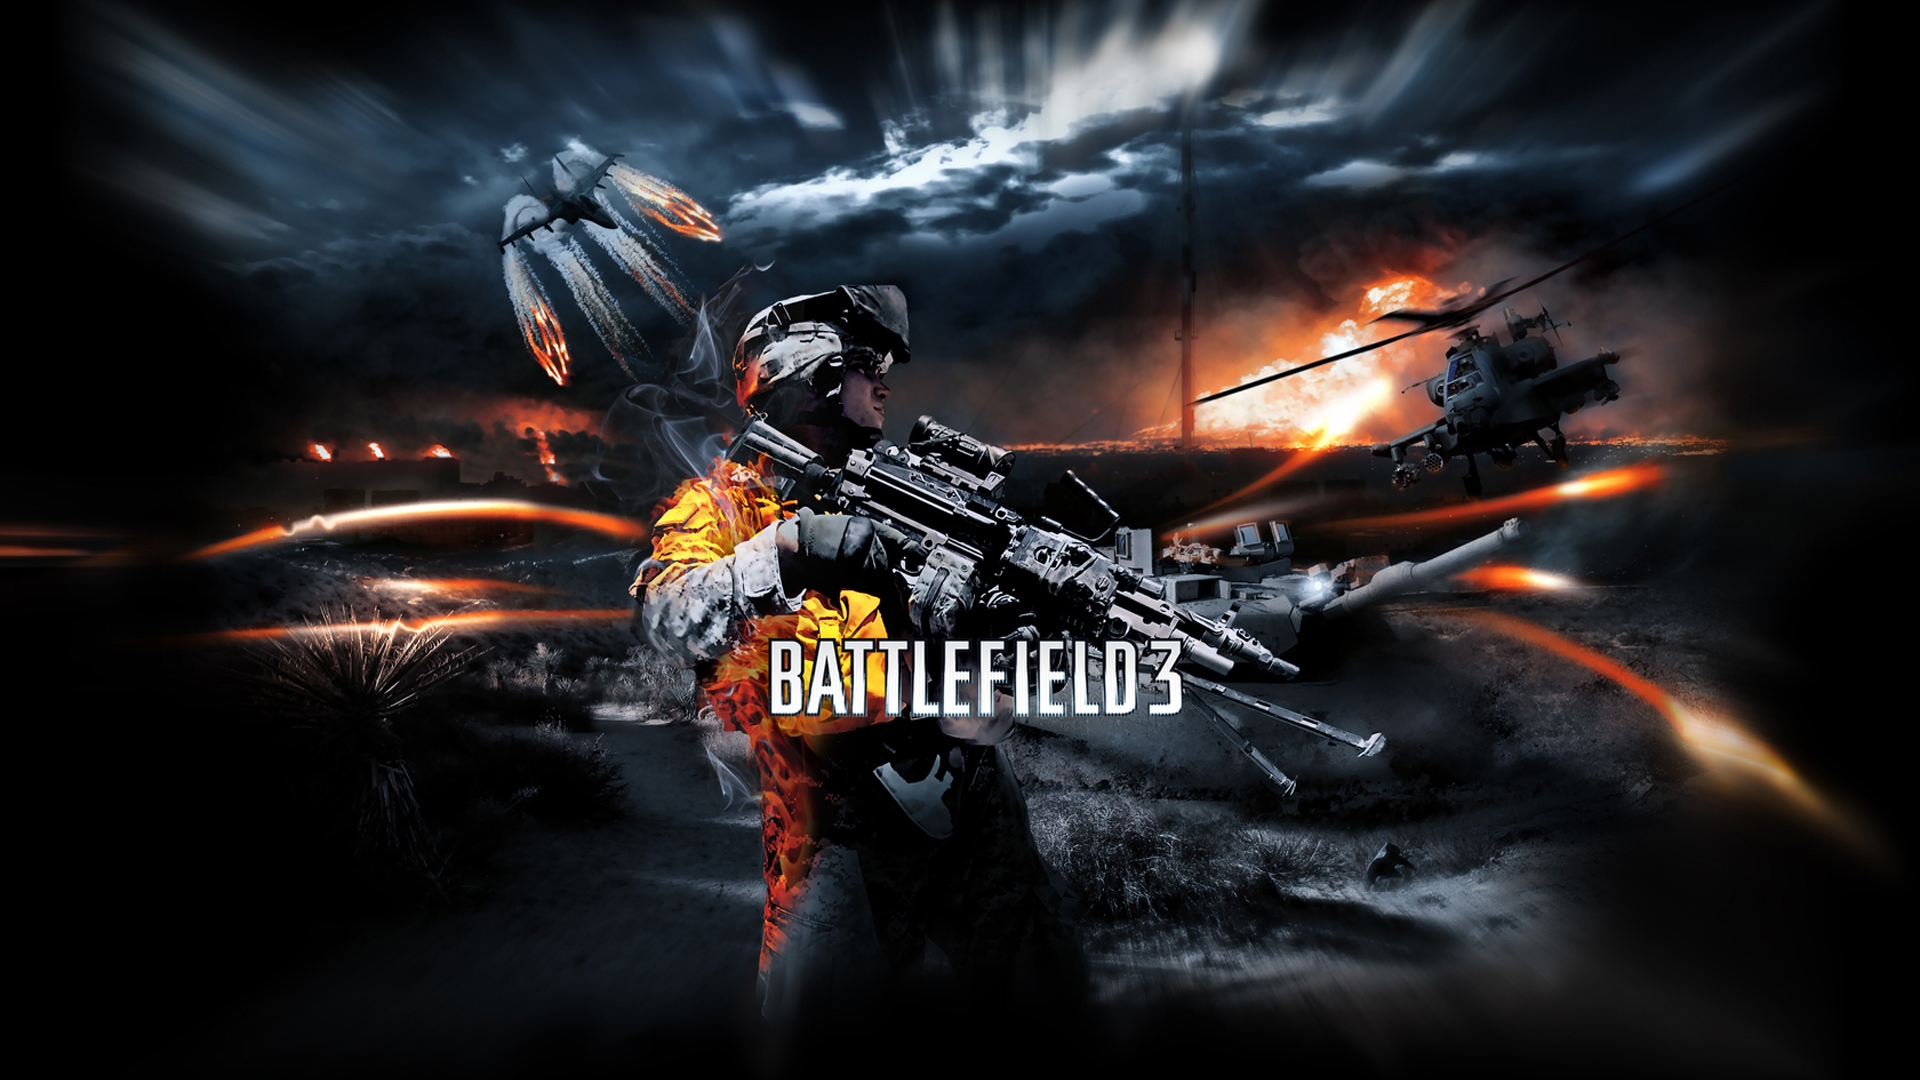 battlefield 3 wallpaper hd,action adventure game,shooter game,pc game,movie,games